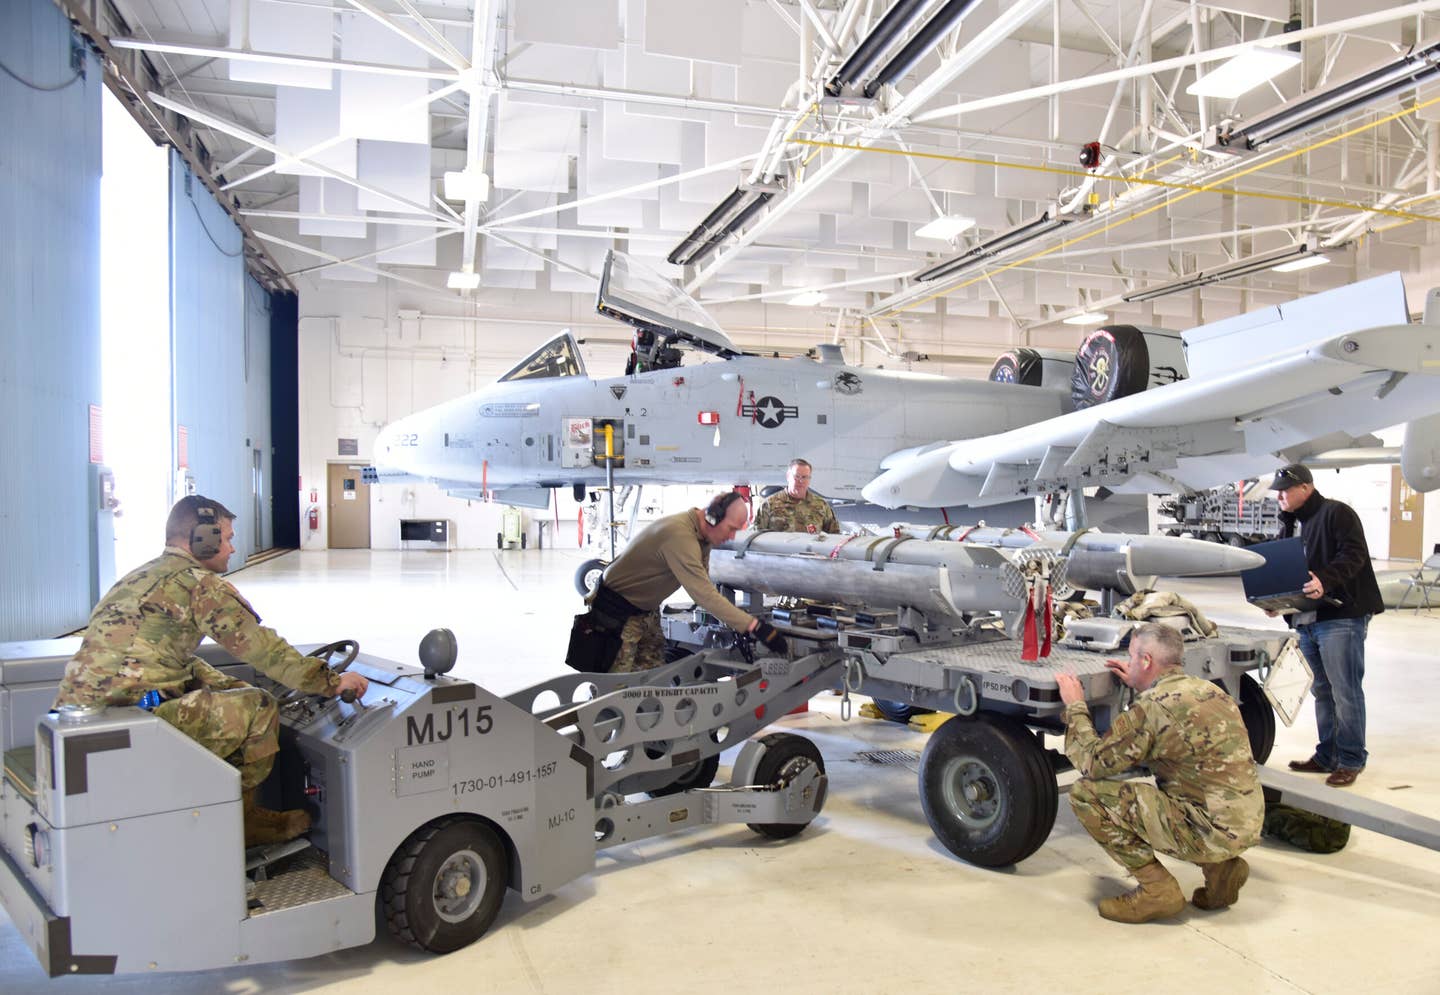 U. S. Air National Guard Members assigned to the 127th Wing prepare to load a Miniature Air-Launched decoy, MALD, onto an A-10 Thunderbolt II at Volk Field Air National Guard Base, Wis., Mar. 1, 2022. (Credit: U.S. Air National Guard photo by Tech. Sgt. Samara Taylor)